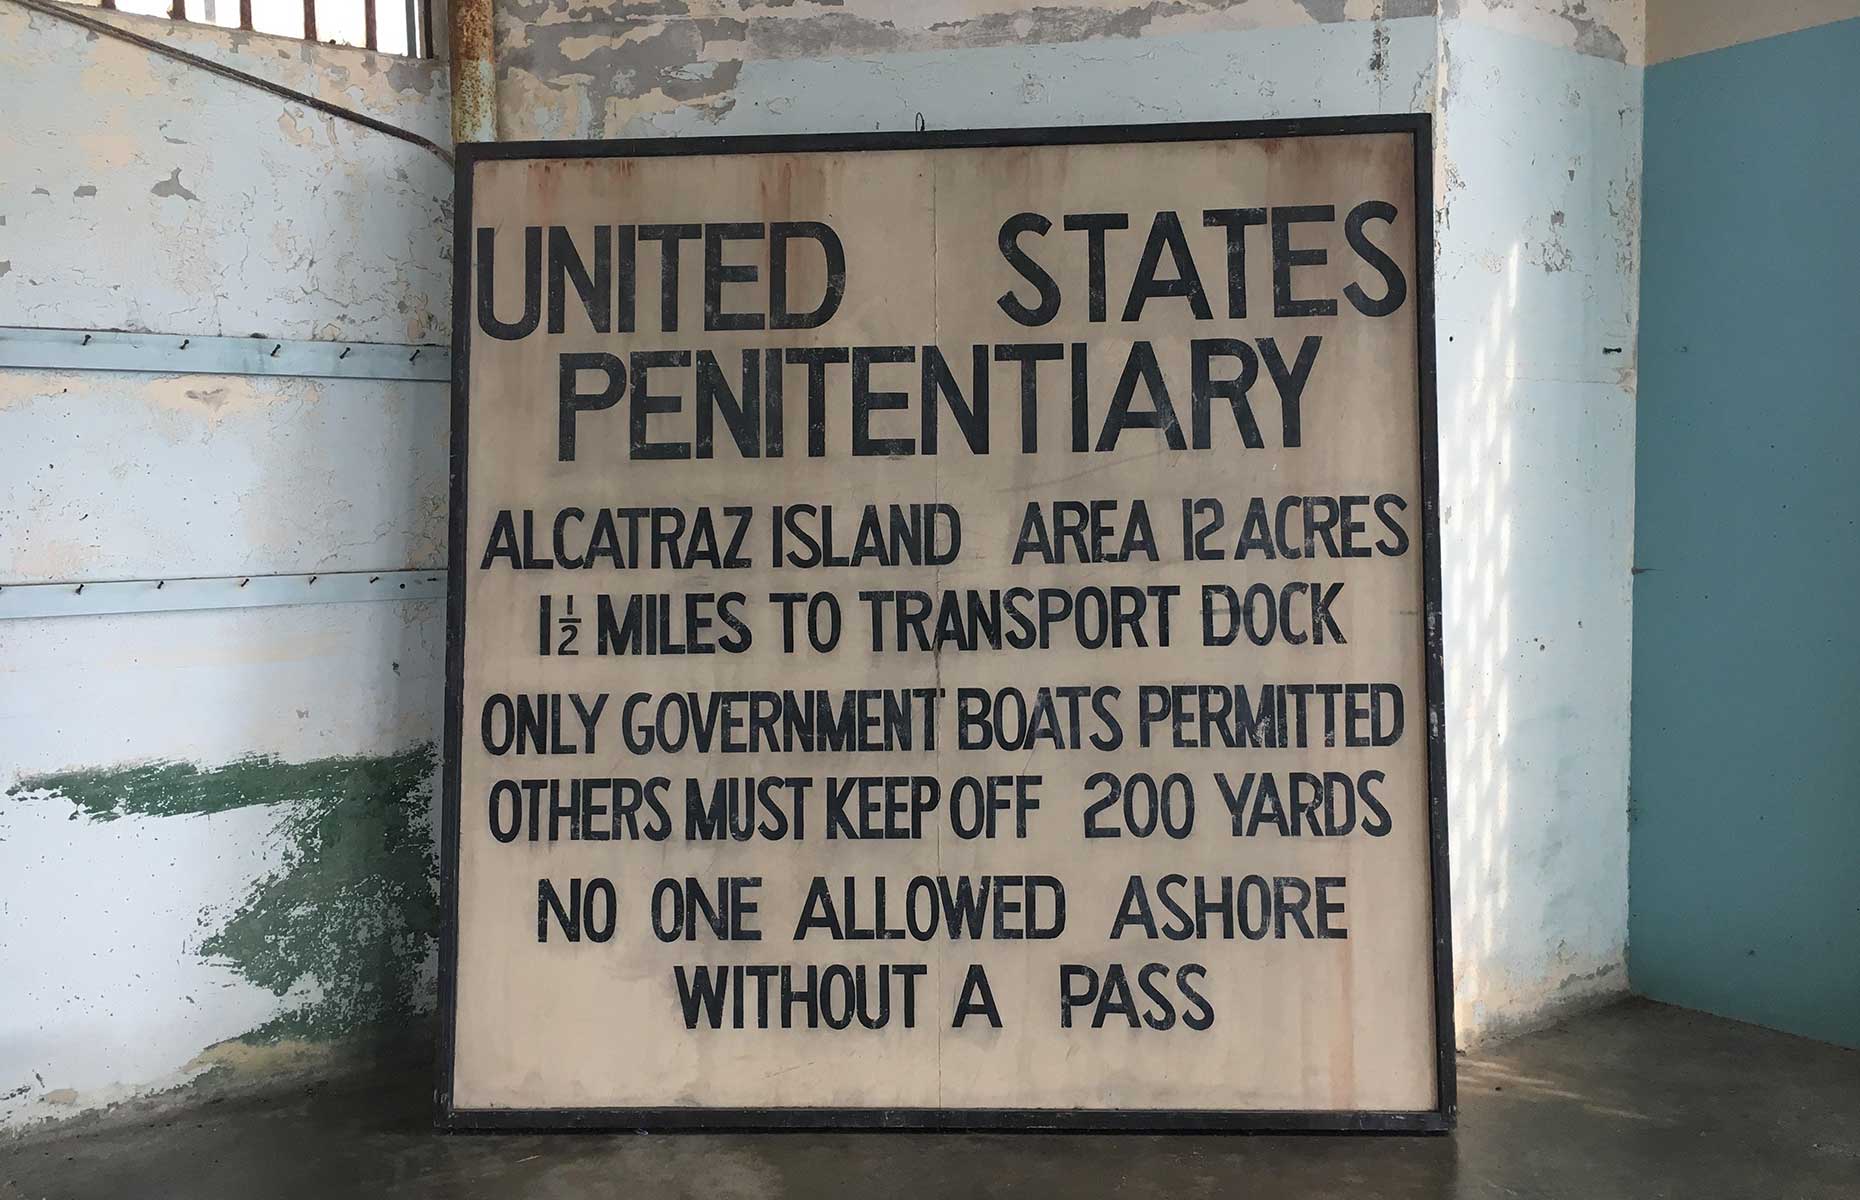 Sign within Alcatraz State Penitentiary (Image: Elisa Day/Shutterstock)